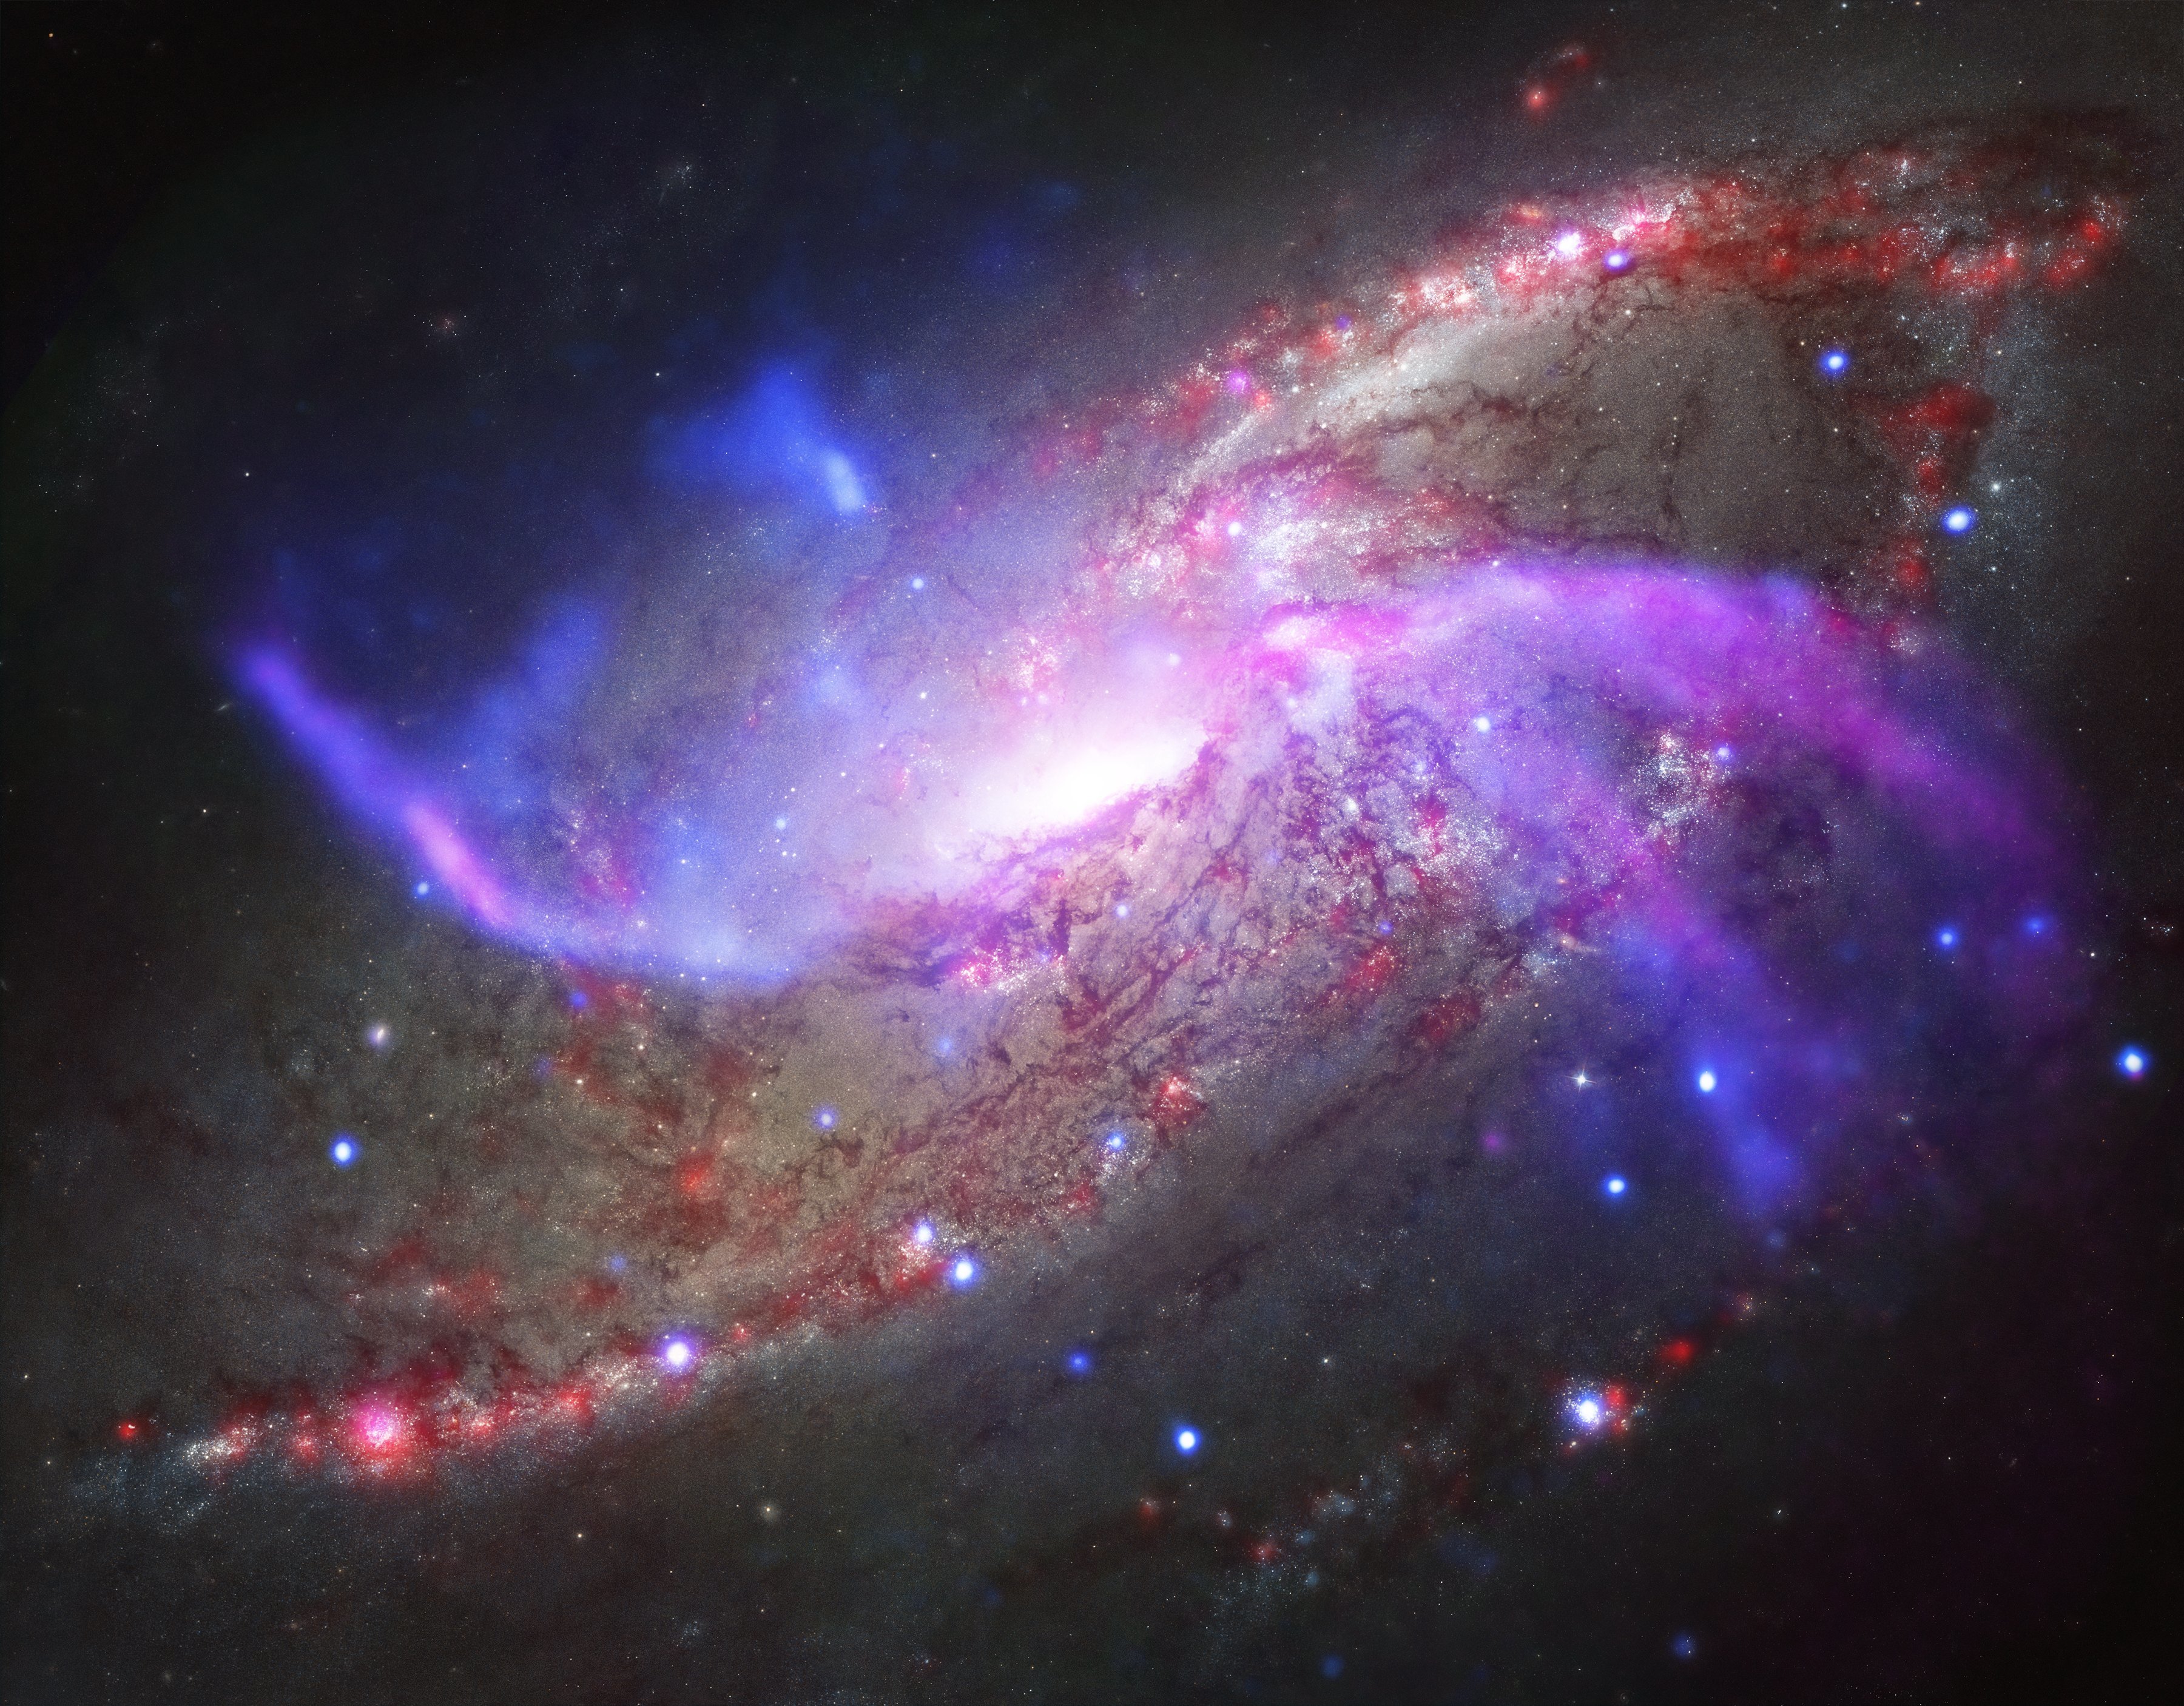 Download background galaxy, supermassive black hole, sci fi, black hole, messier 106, spiral galaxy